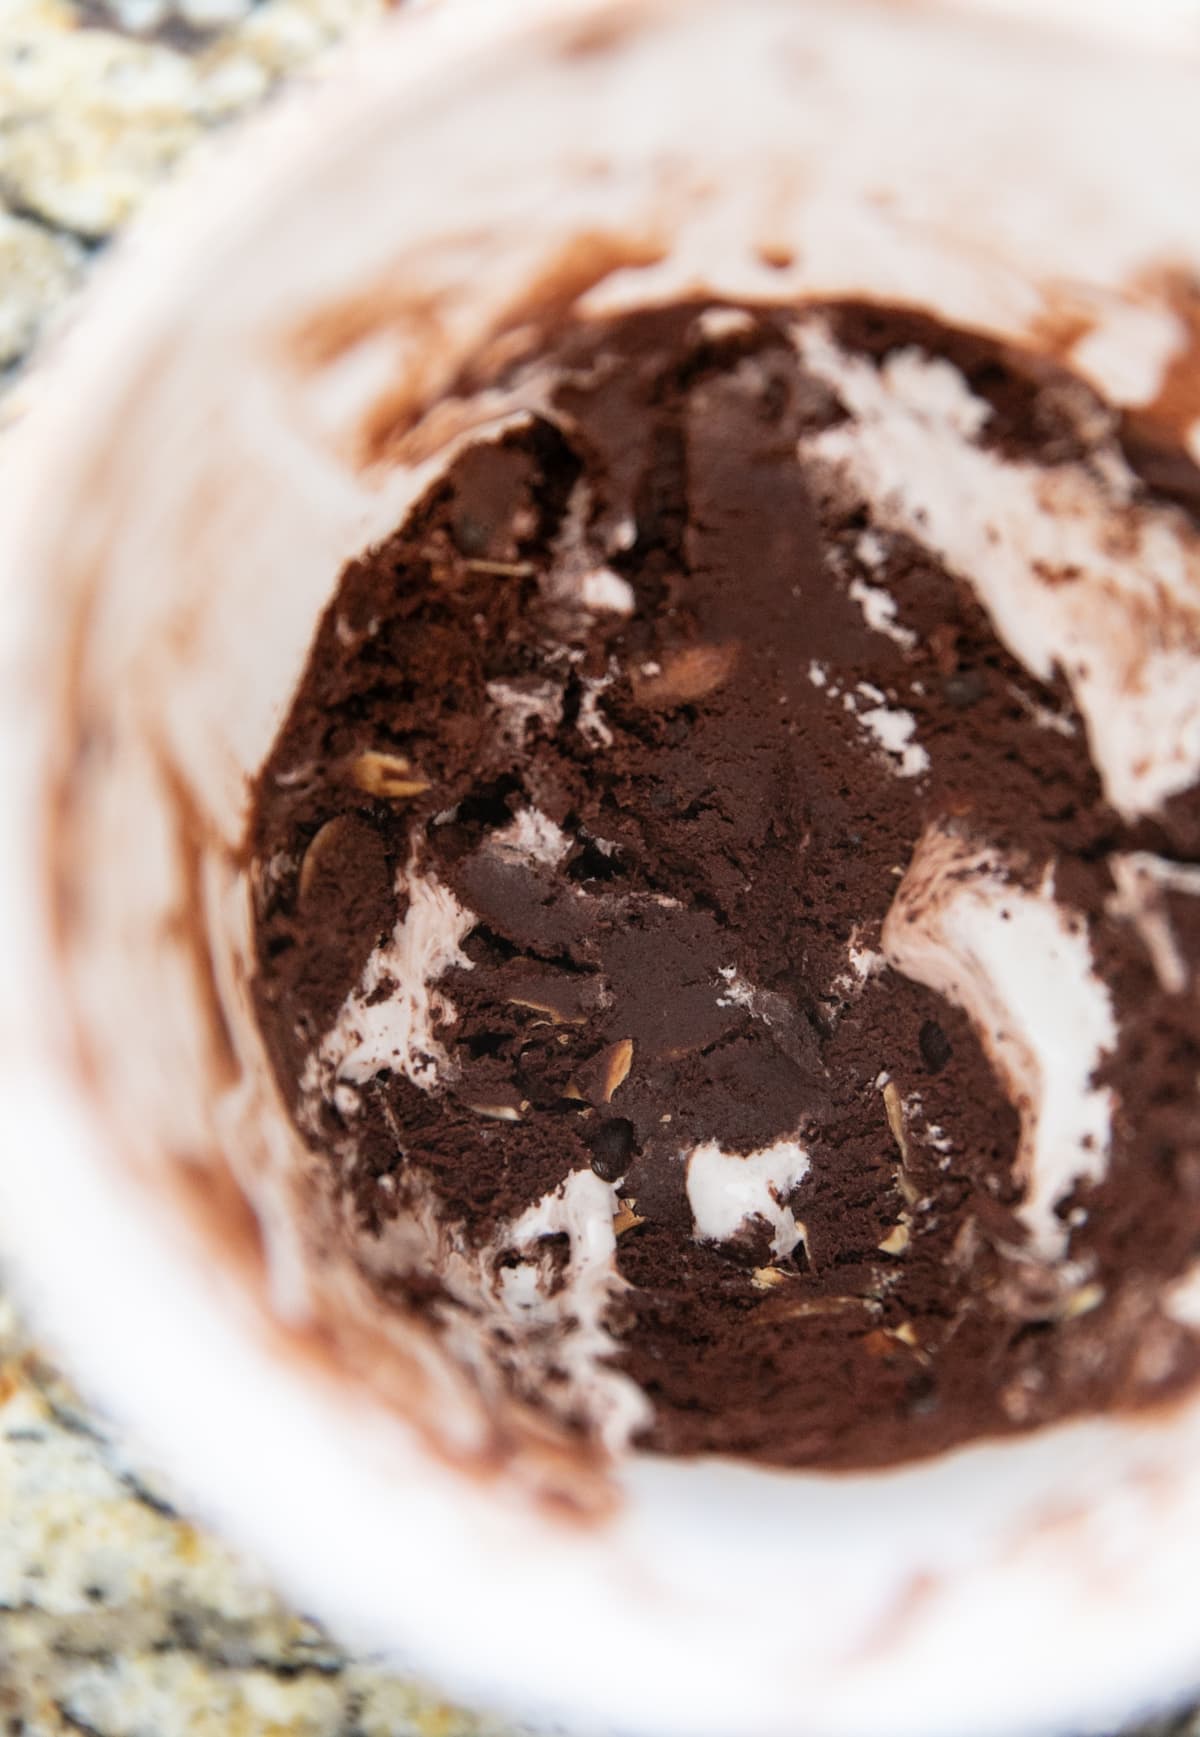 rocky road ice cream frozen in a plastic container